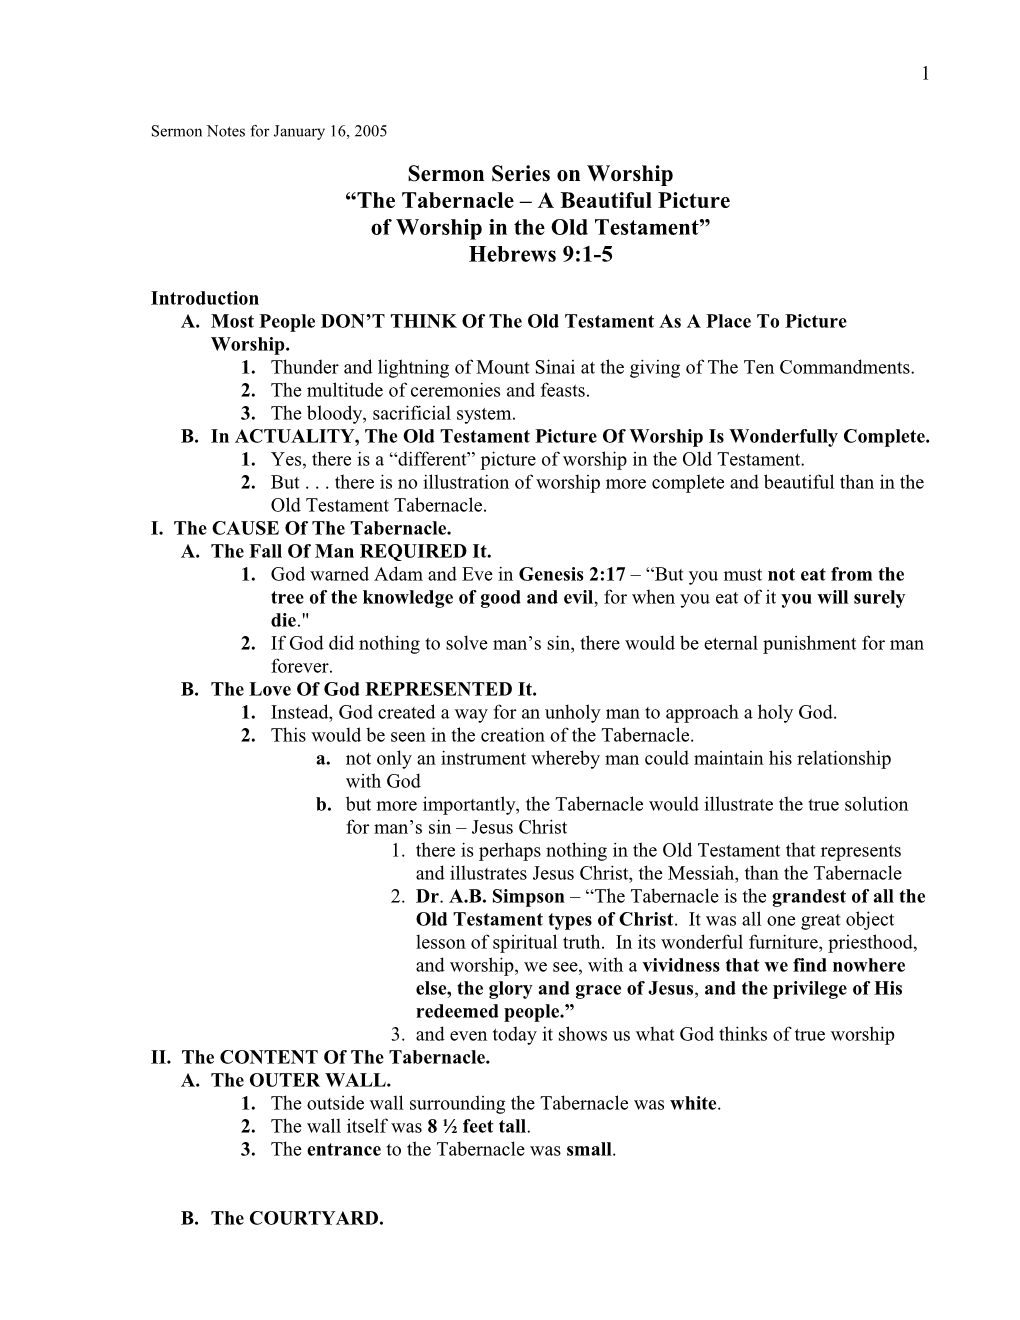 Sermon Notes for January 16, 2005